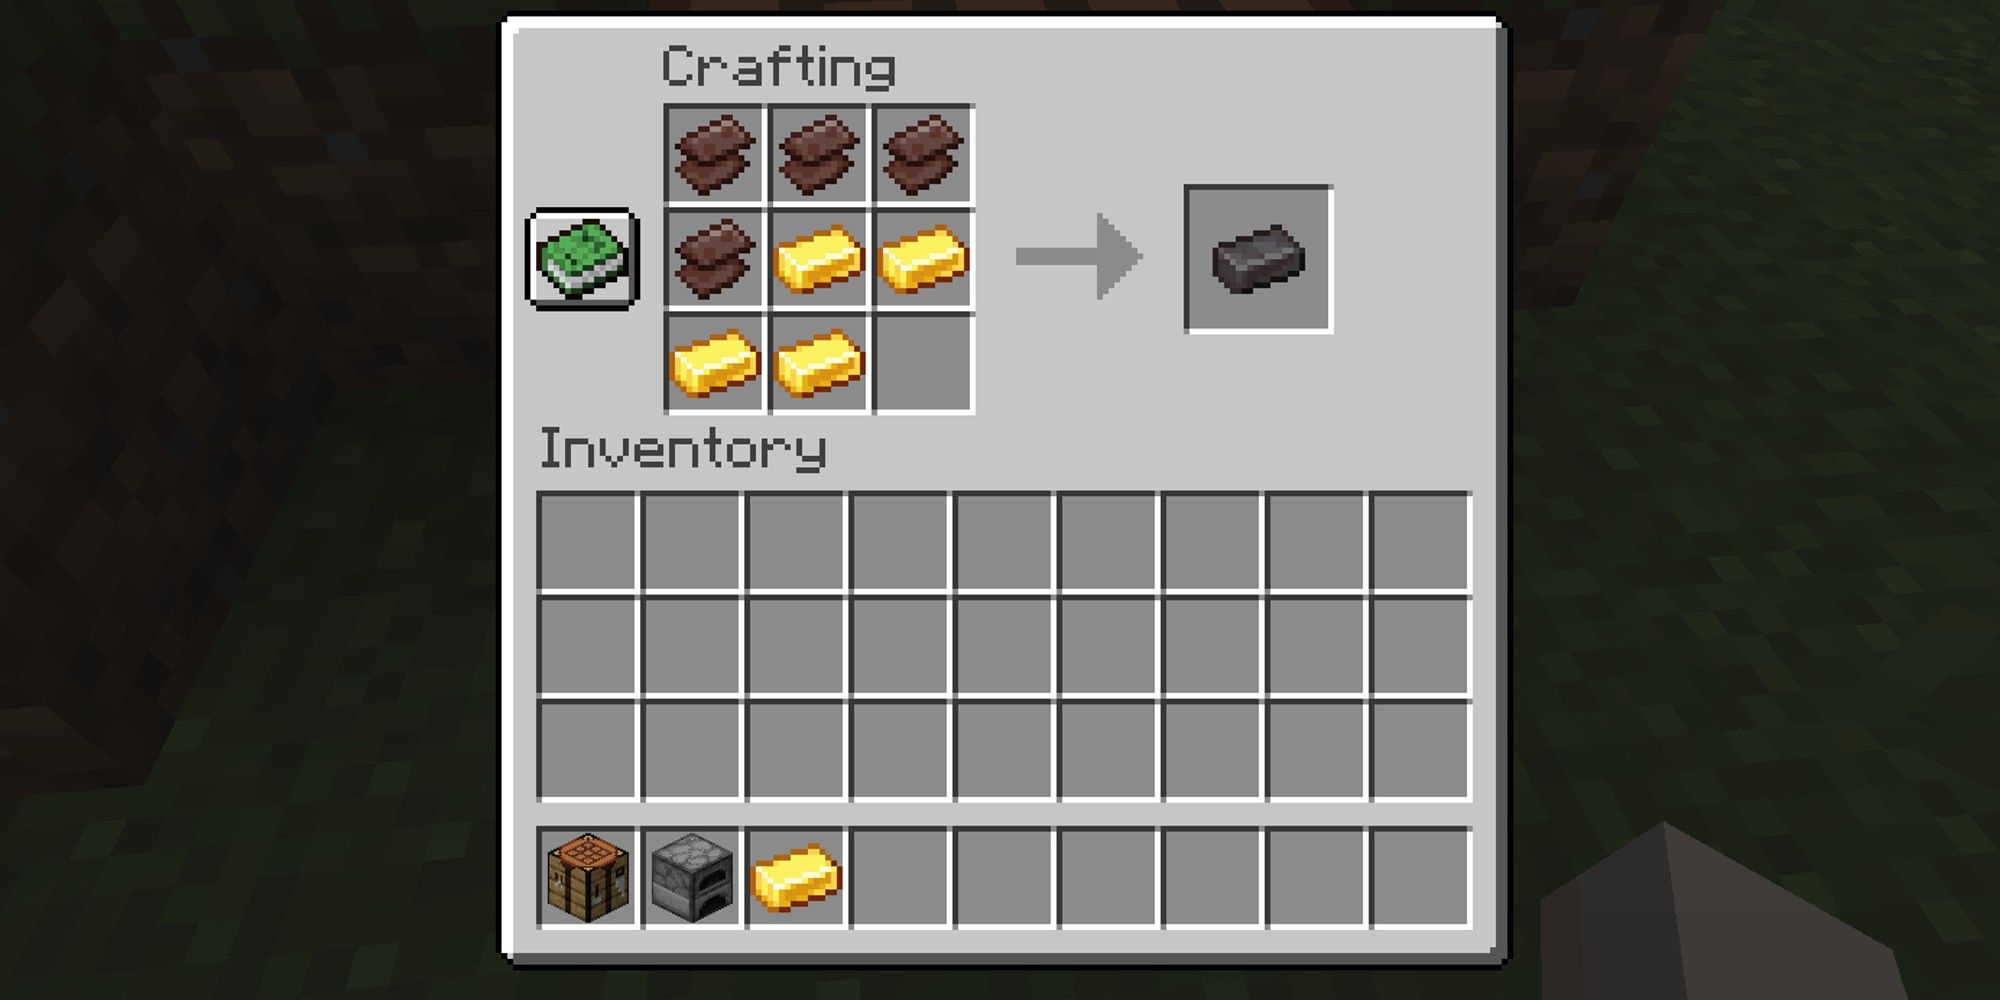 gold and netherite scraps combined to make one netherite ingot